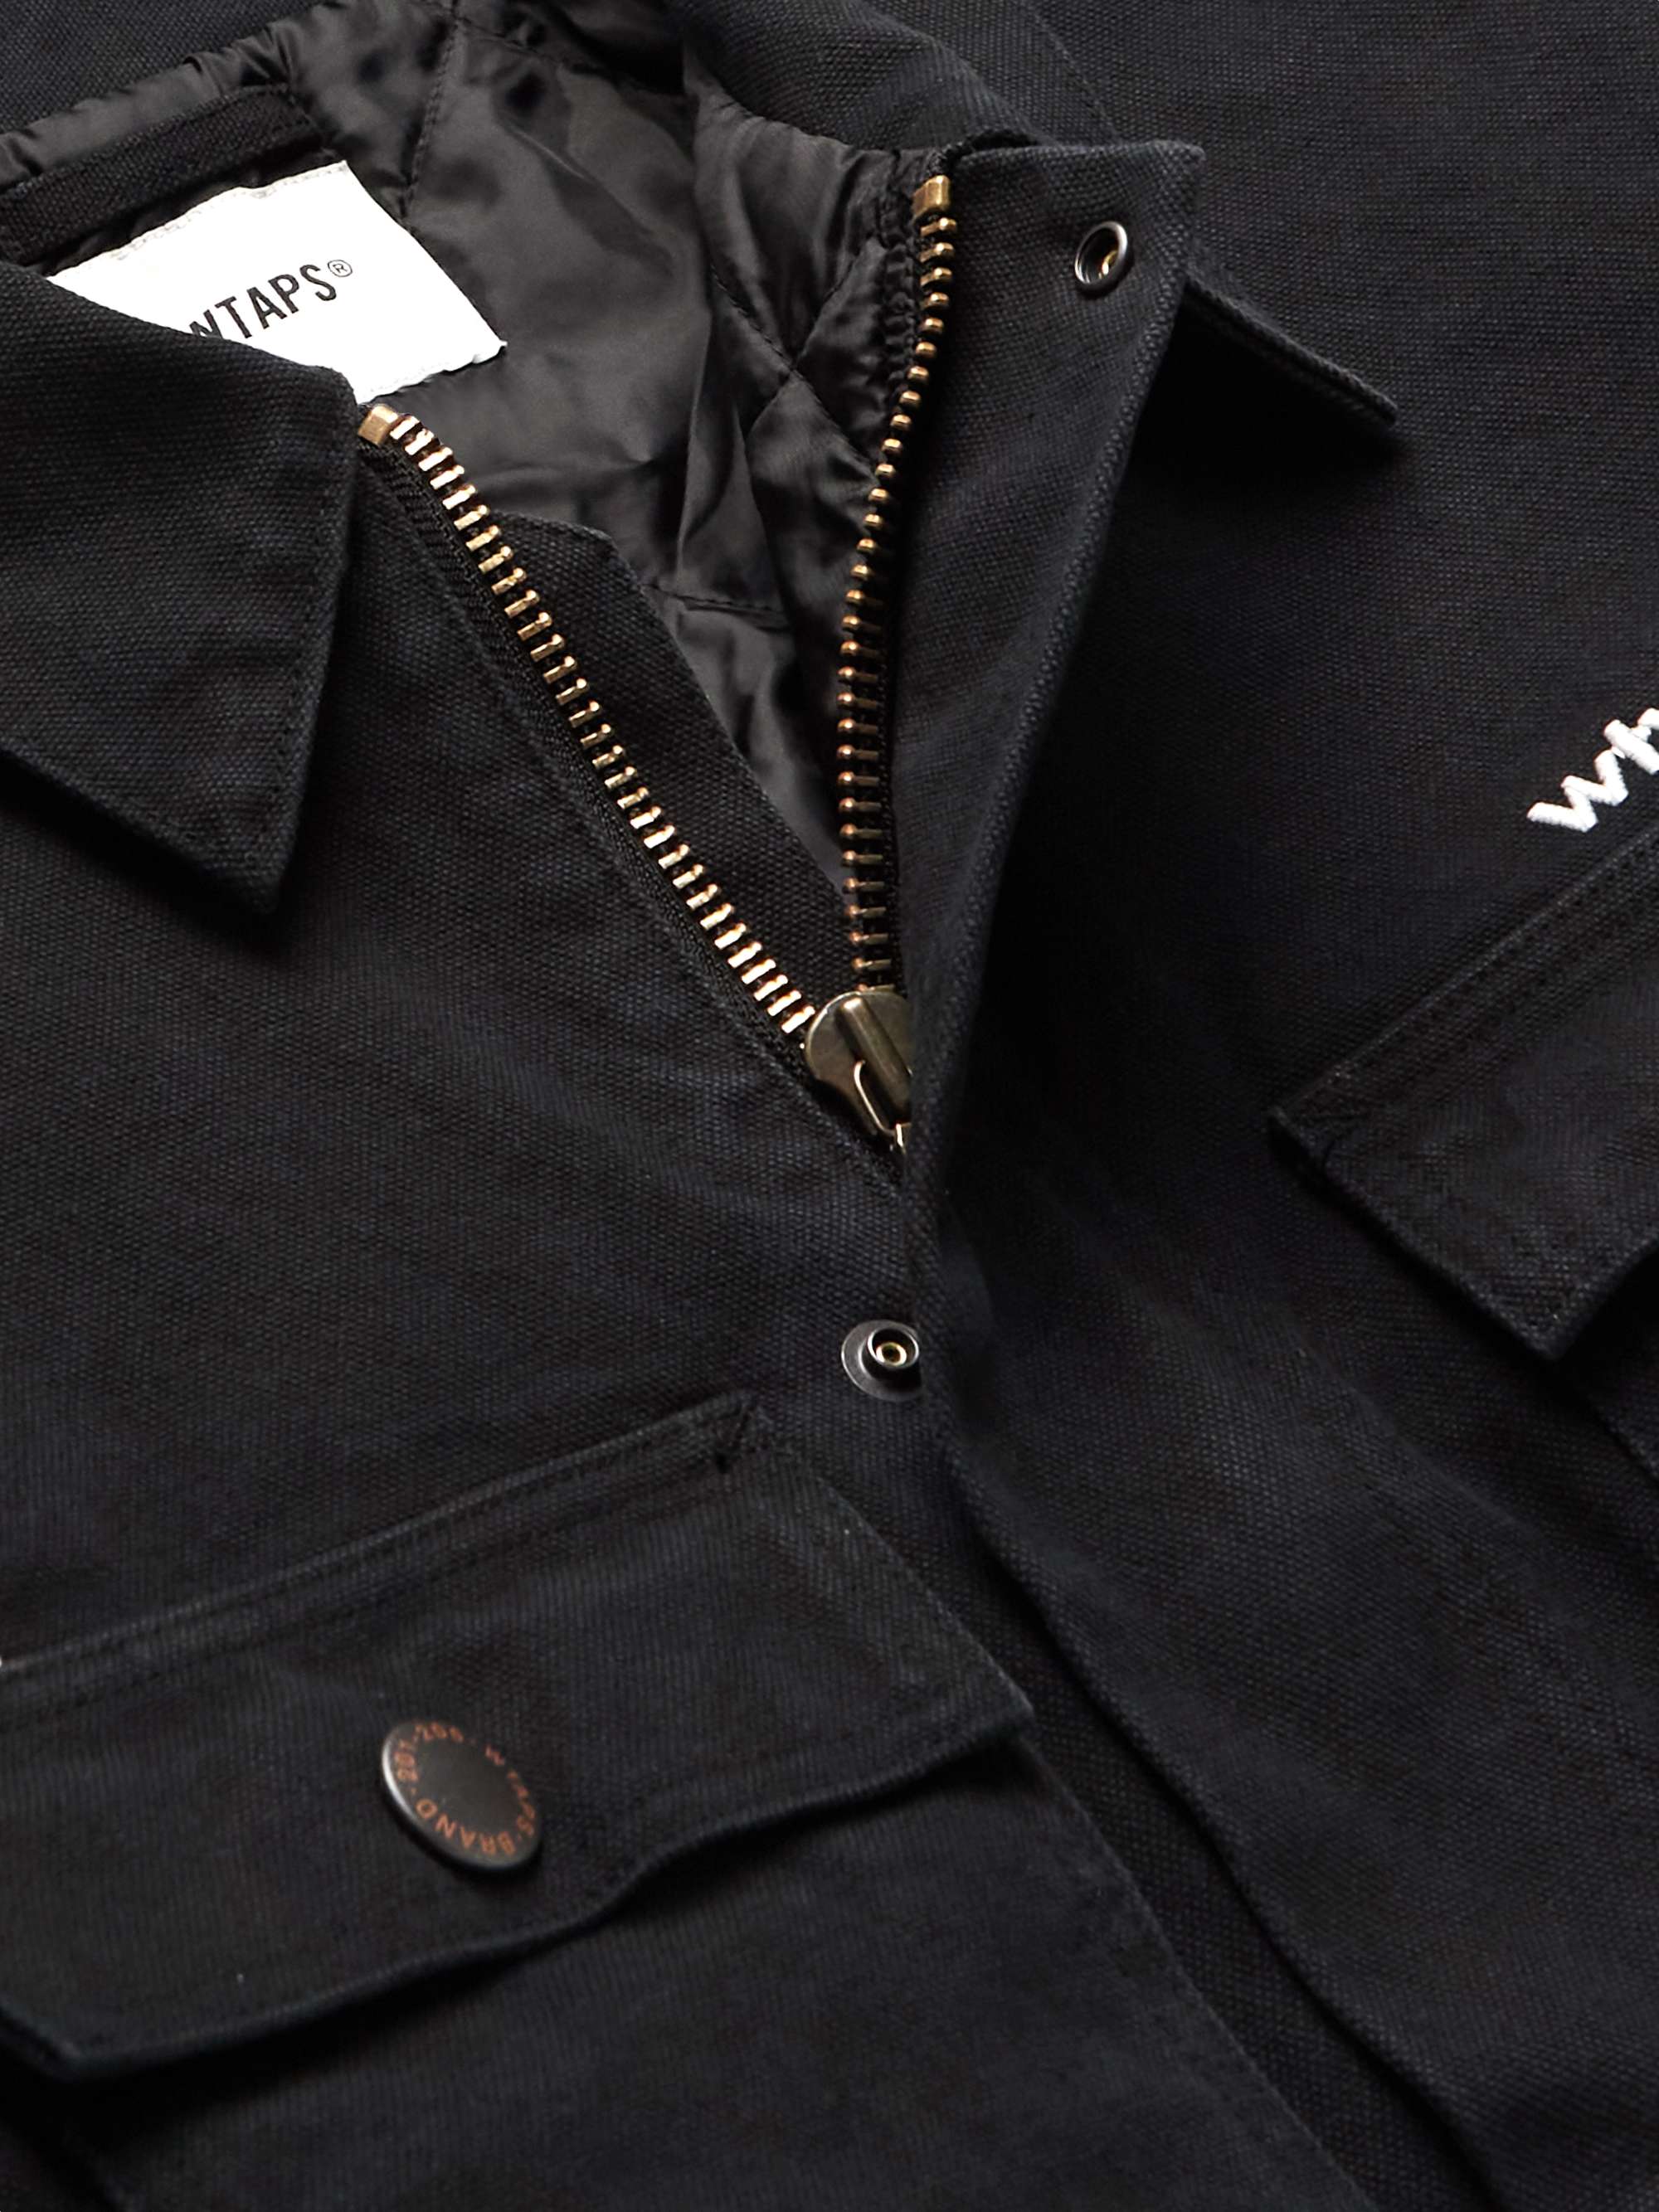 WTAPS® Mich Logo-Embroidered Cotton-Canvas Jacket